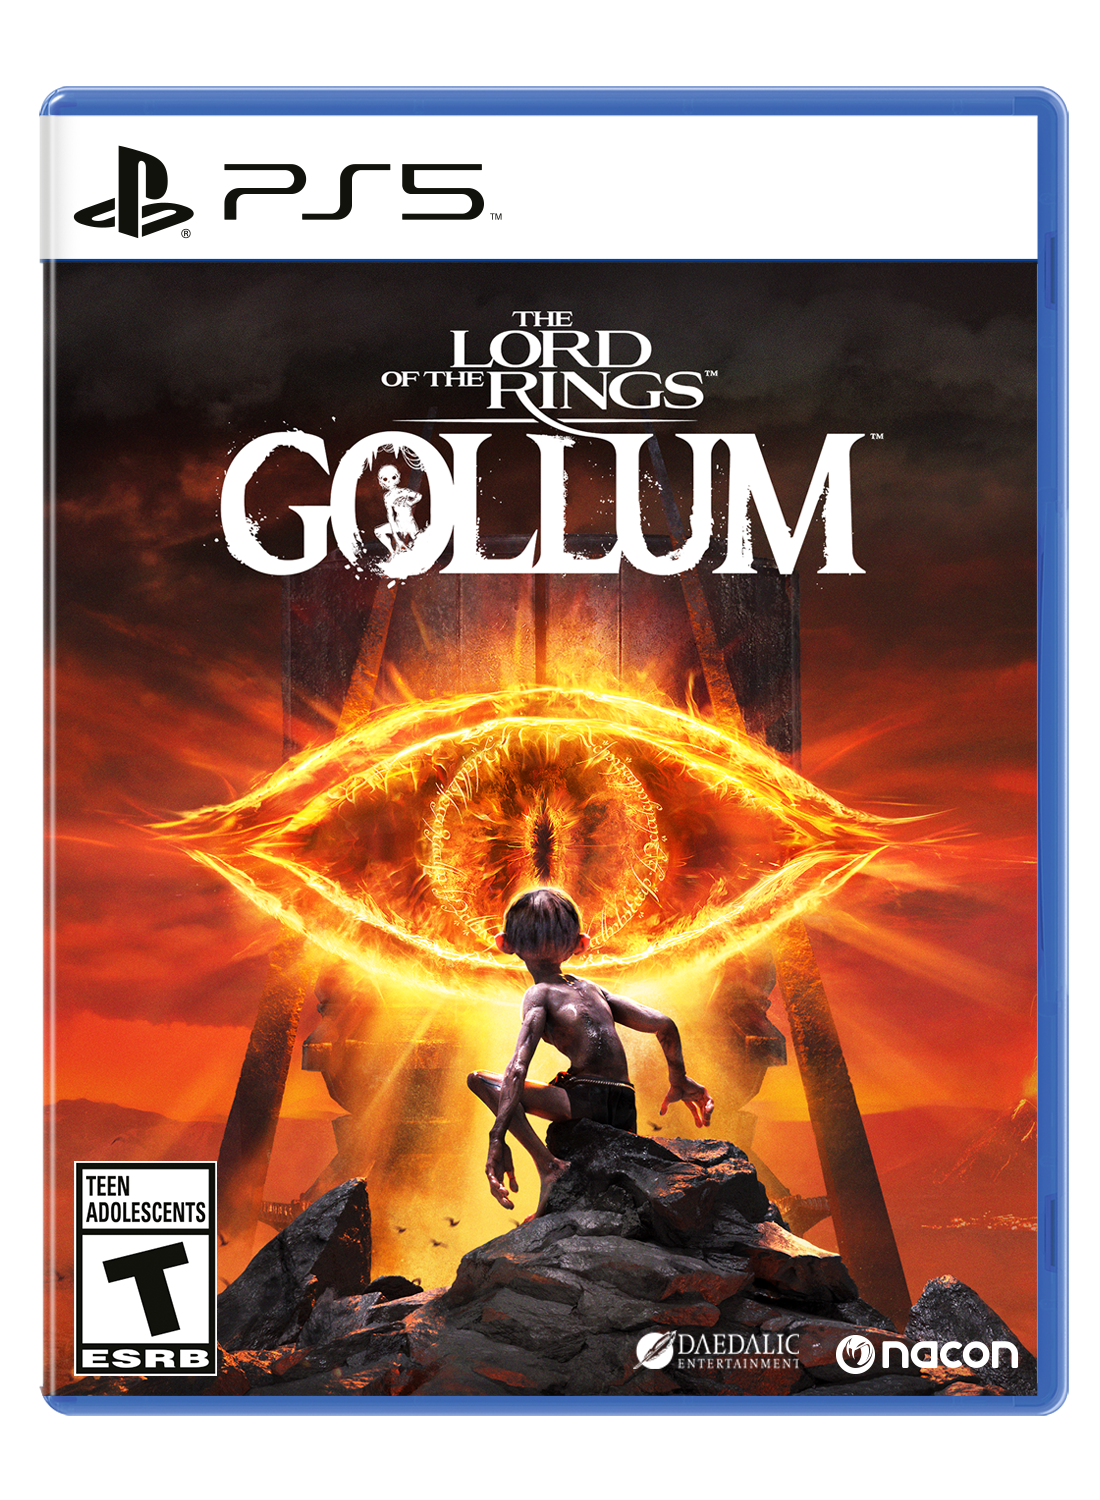 Lord of the Rings: Gollum: Not Precious - PS5 Review